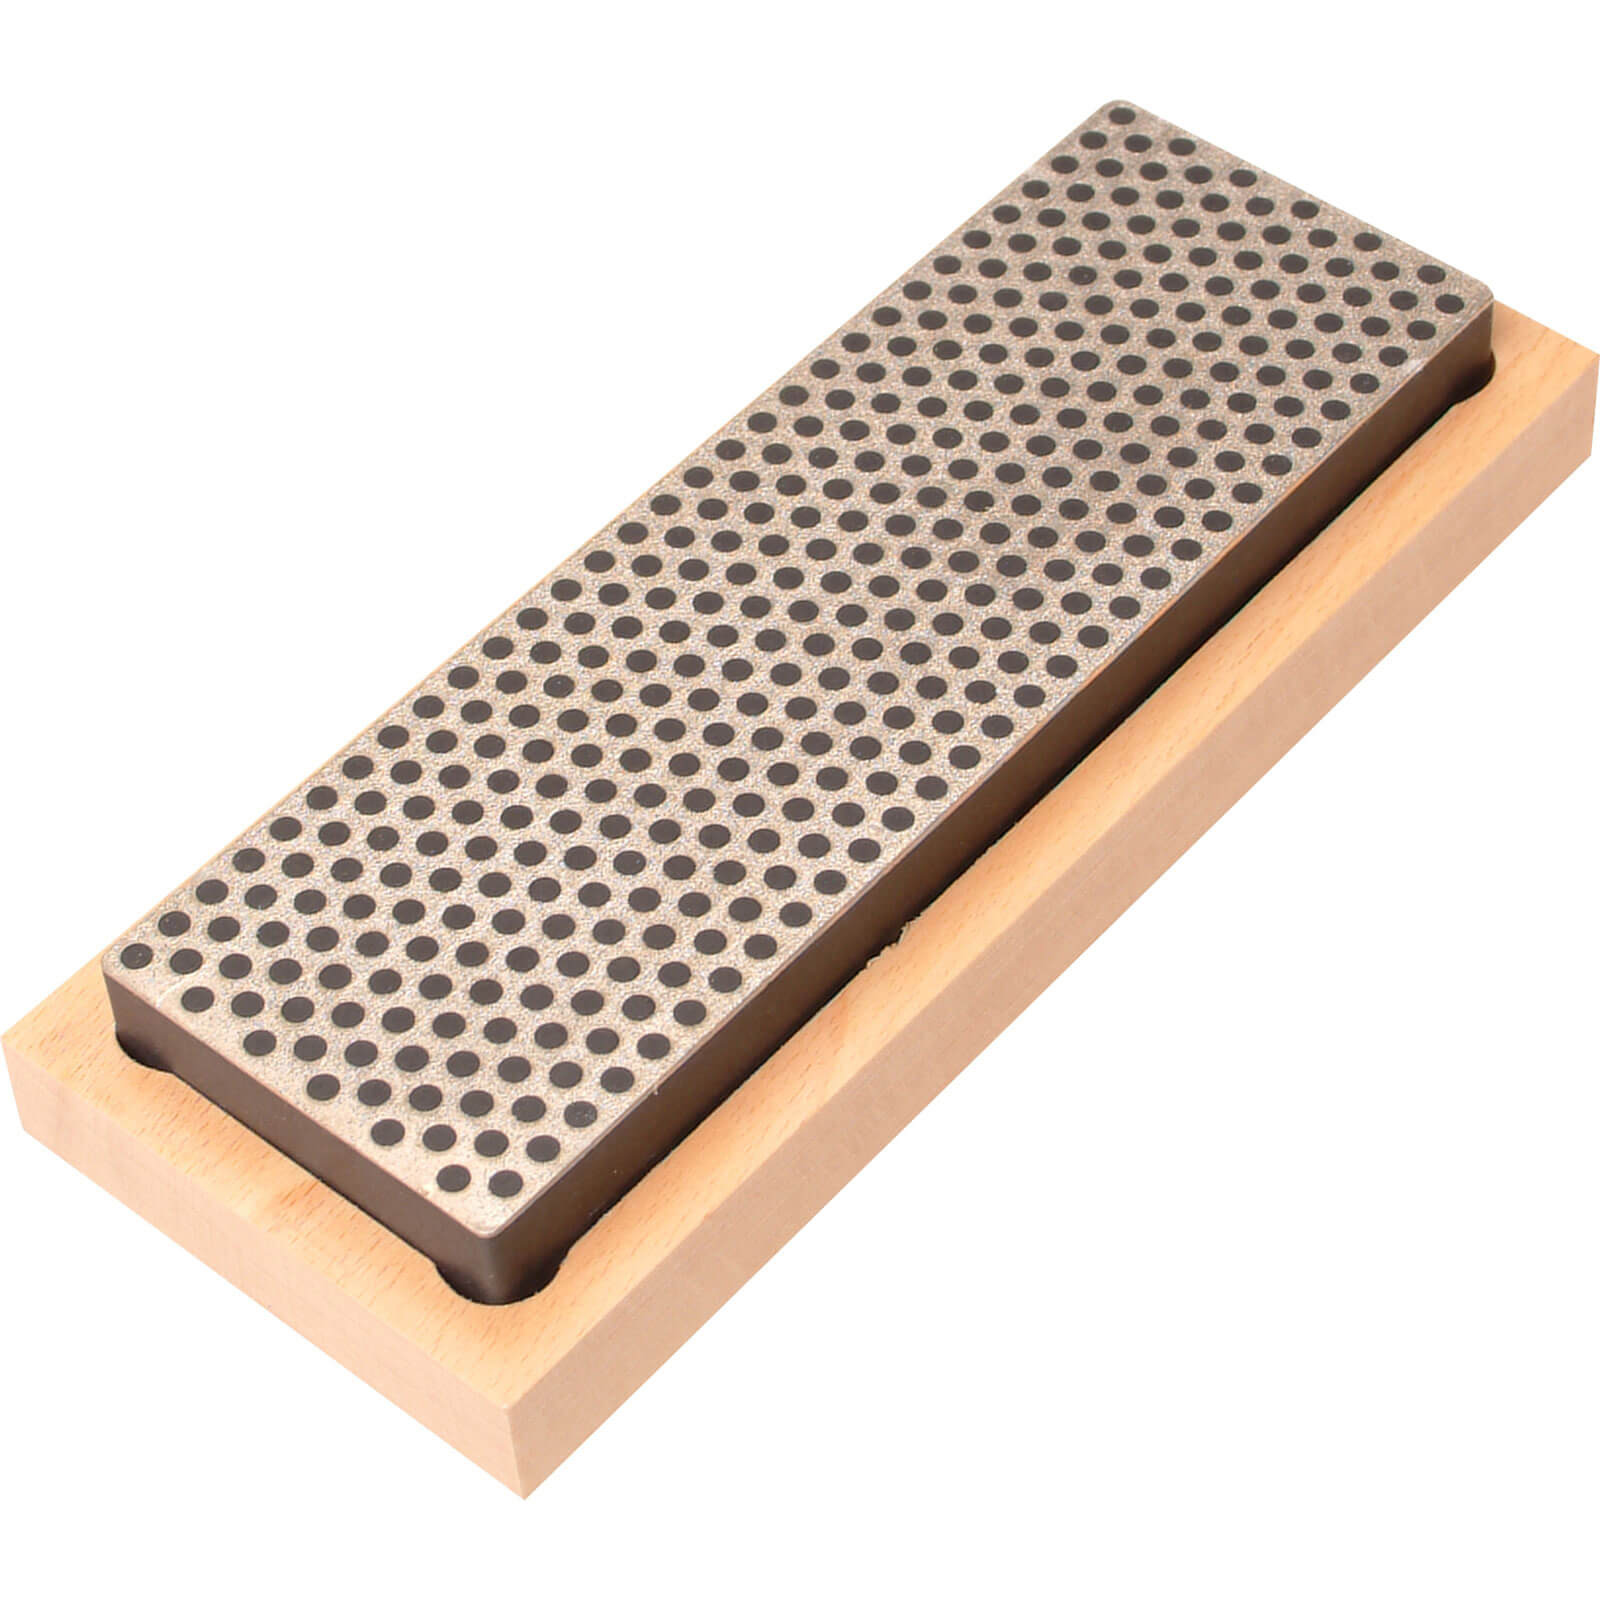 DMT 150mm Diamond Whetstone and Wooden Case Extra Coarse